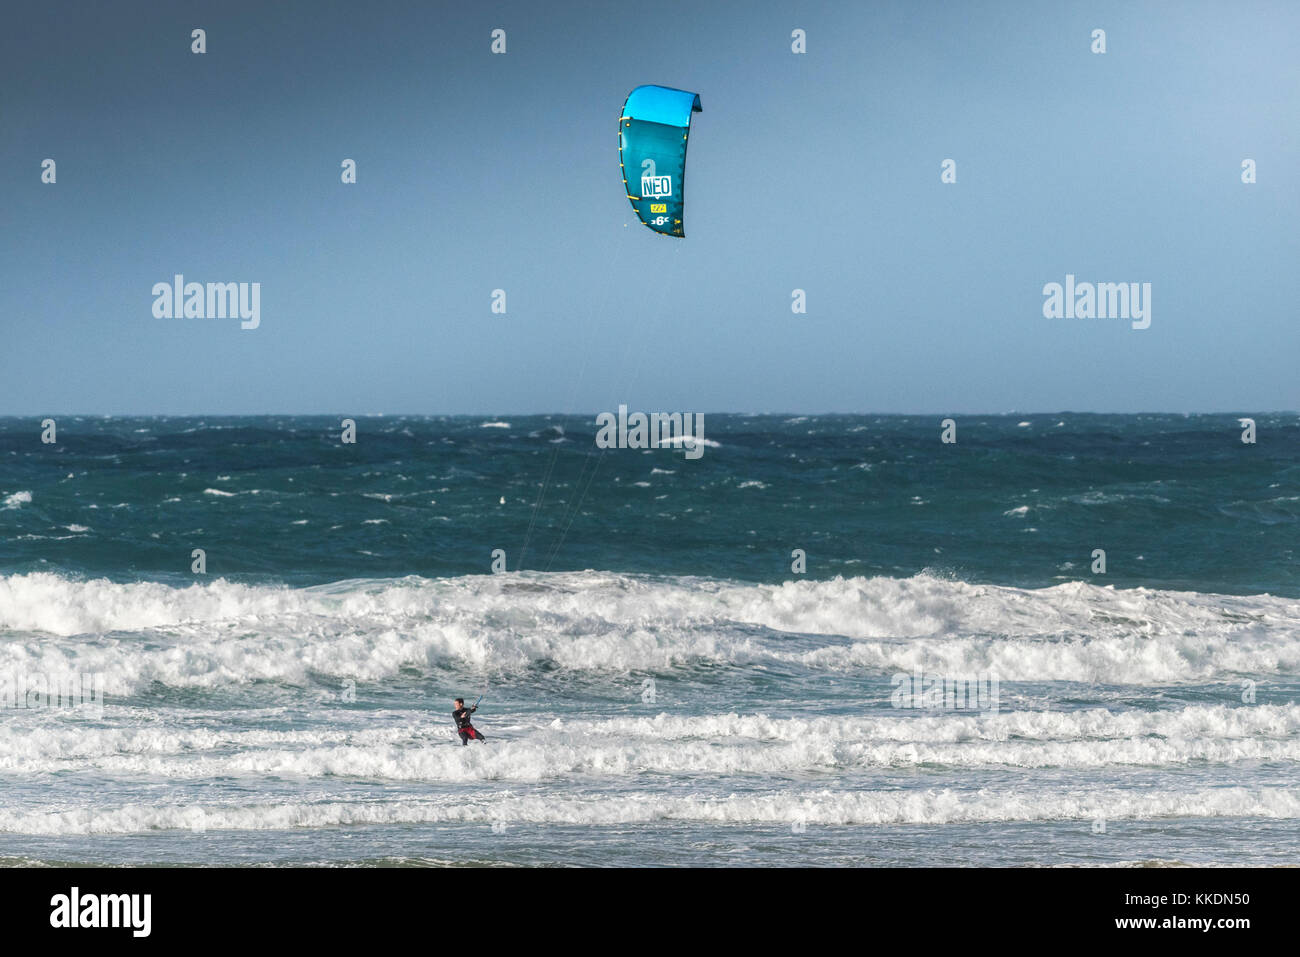 Para-surfing - a kite-surfer para-surfer kite surfing in rough seas at Fistral in Newquay Cornwall UK. Stock Photo